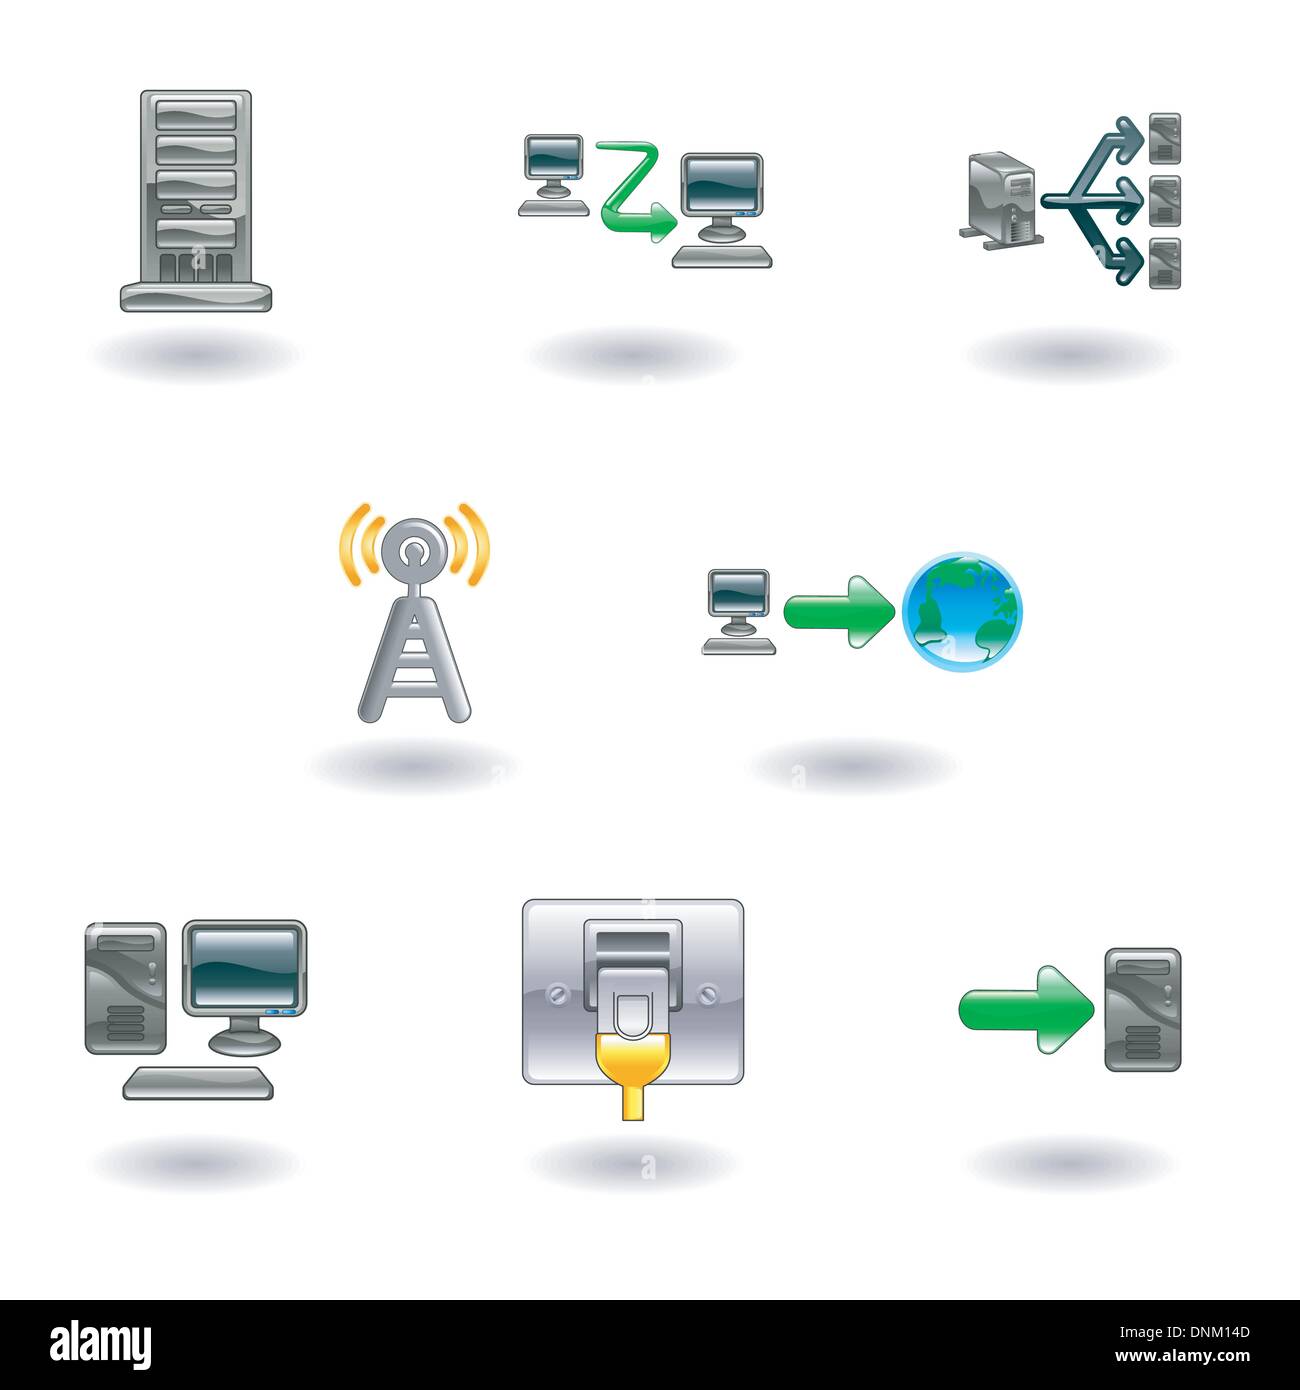 A glossy computer network and internet icon set Stock Vector